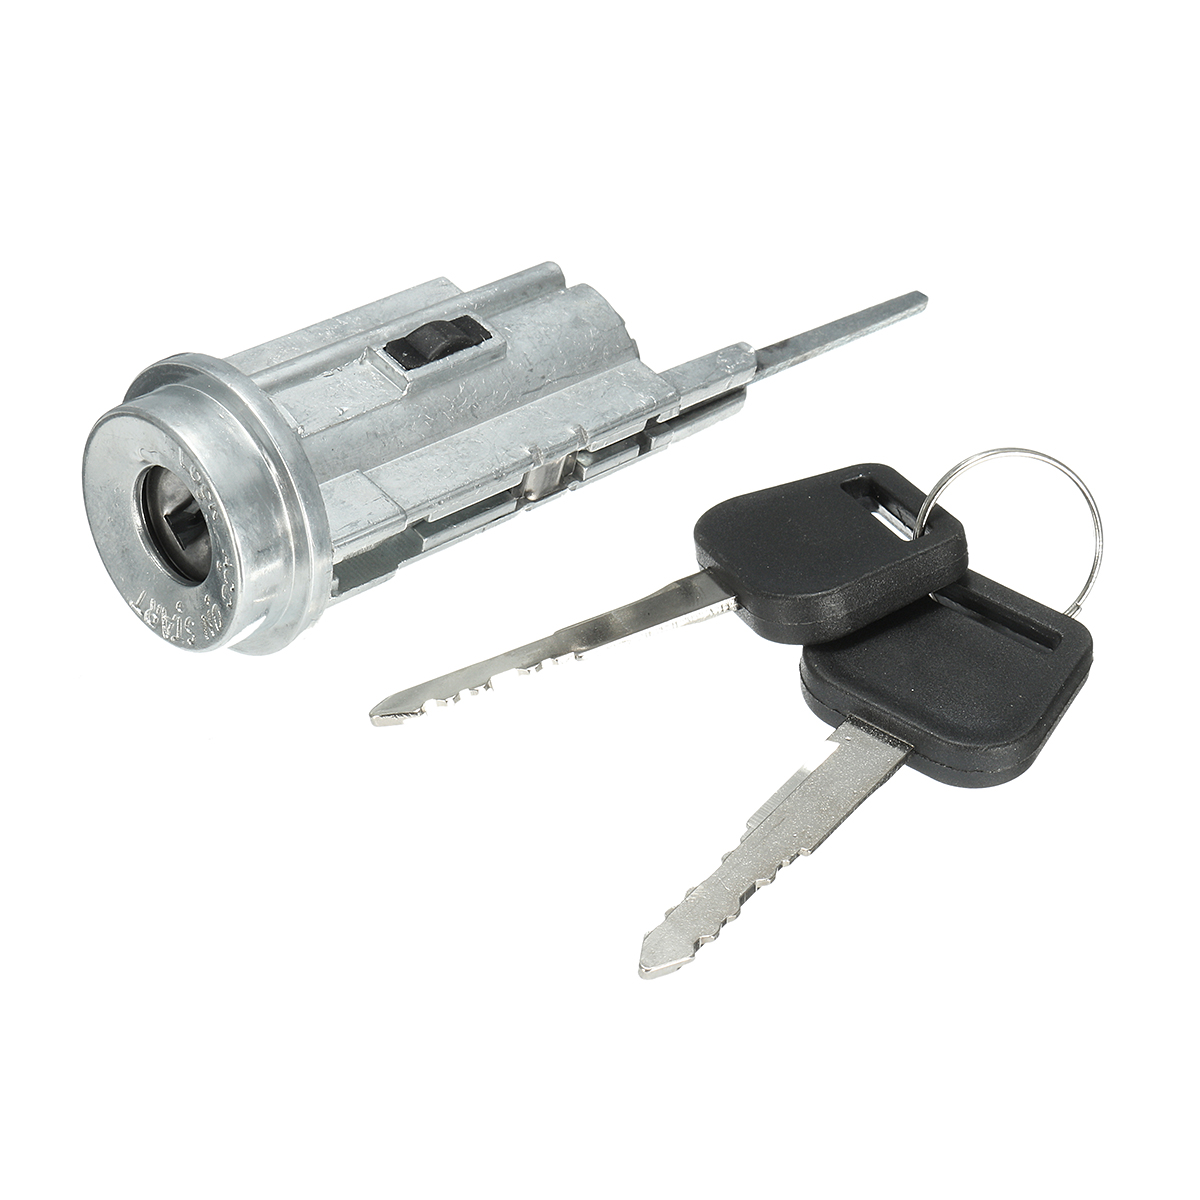 Car Ignition Lock Cylinder with Two Keys for Toyota Camry Solara Avalon 1995- 2003 - Auto GoShop